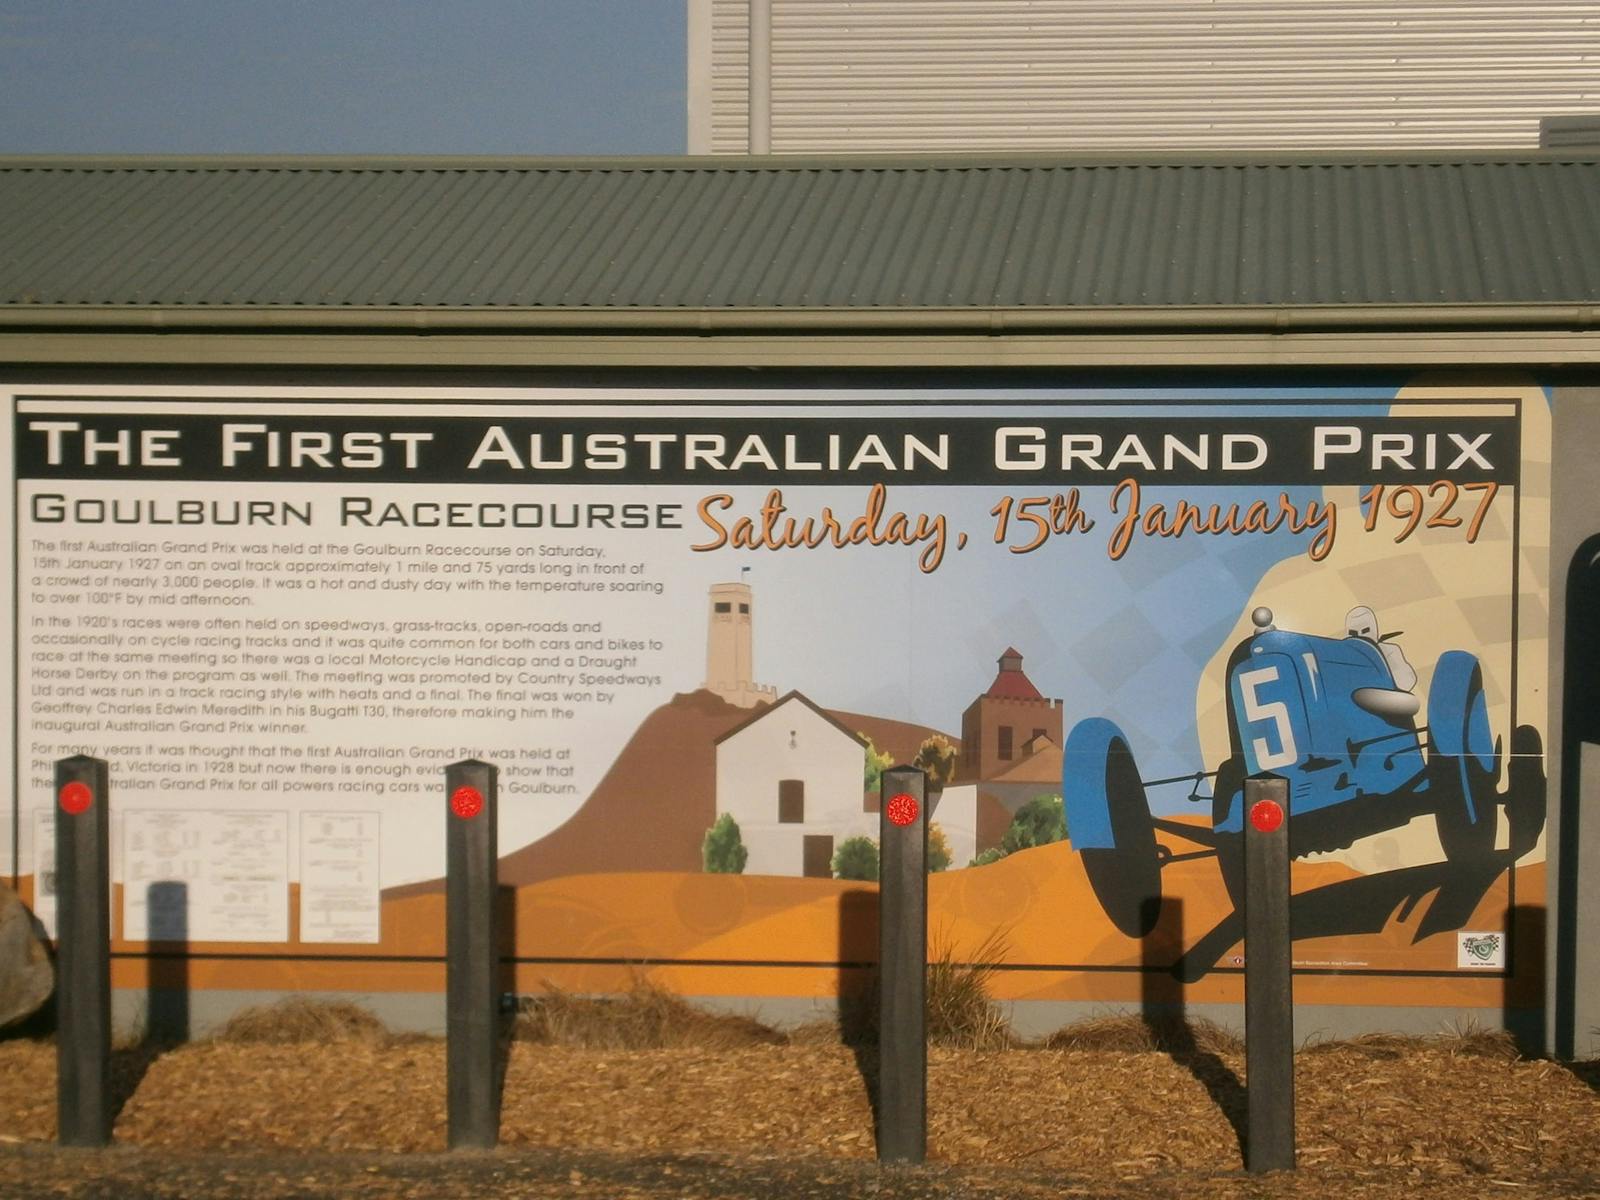 Image for Memorial to the First Australian Grand Prix for All Powers Racing Cars